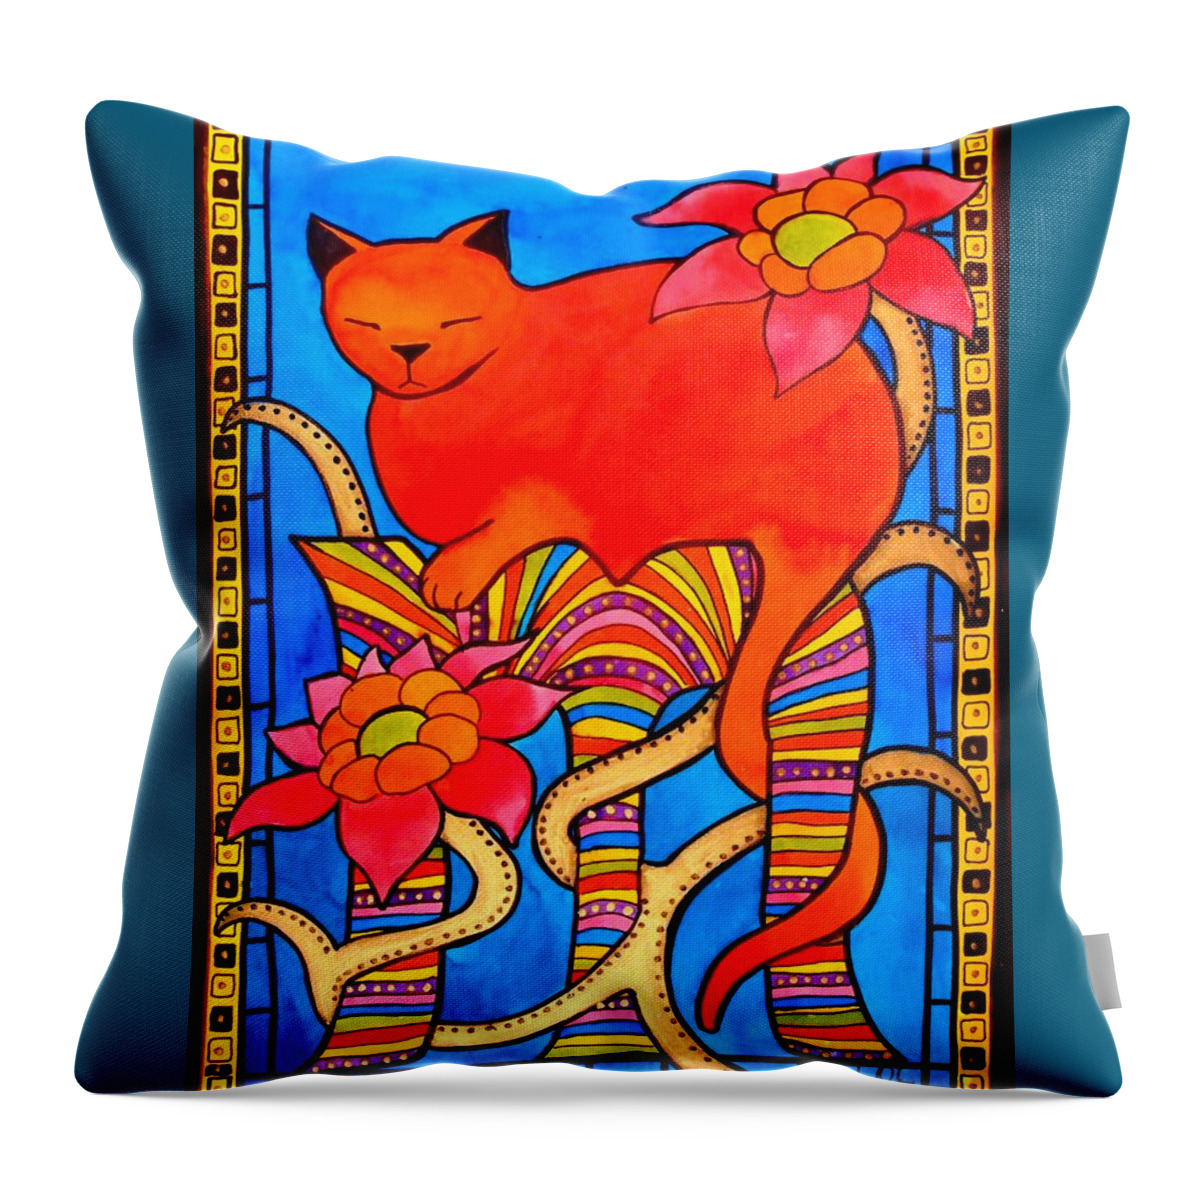 Cats Throw Pillow featuring the painting Sleeping Beauty by Dora Hathazi Mendes by Dora Hathazi Mendes